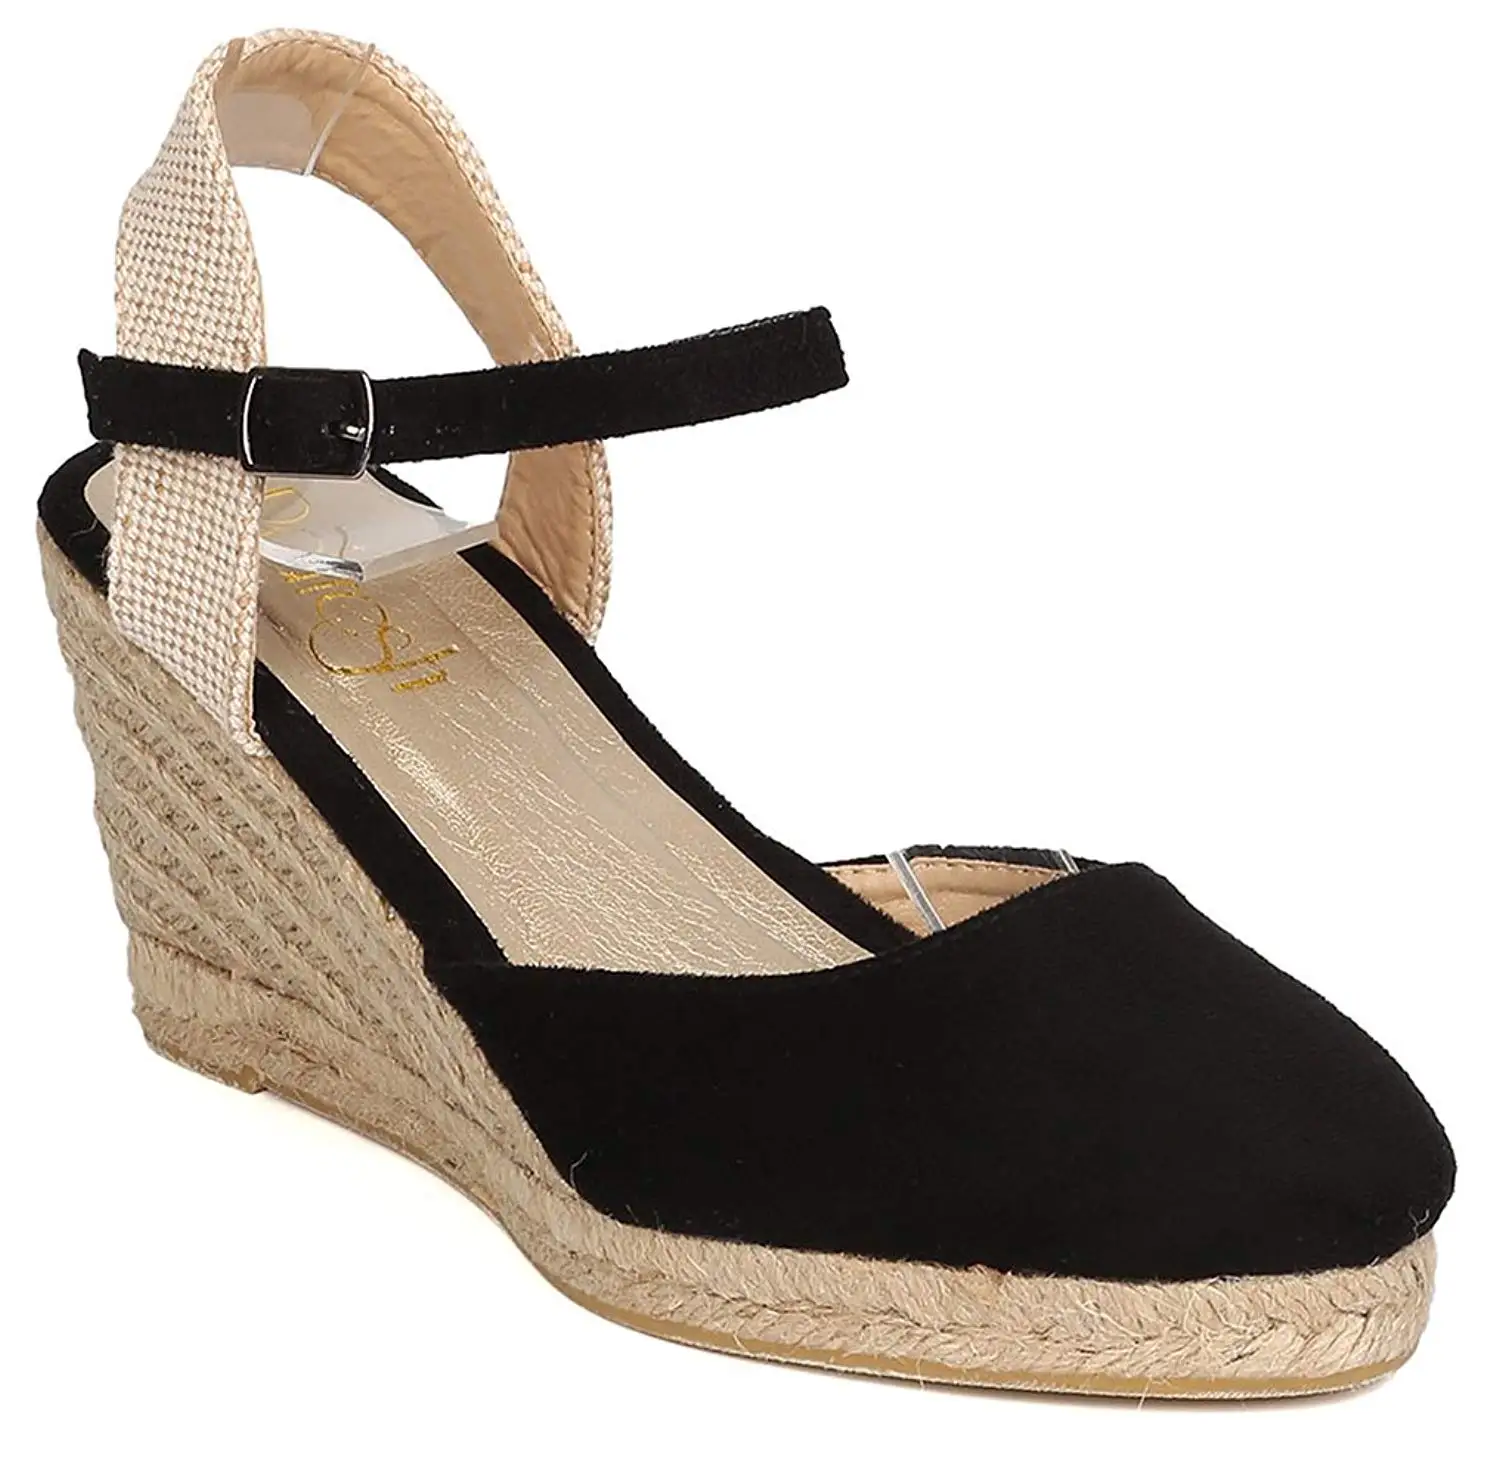 cheap wedge trainers